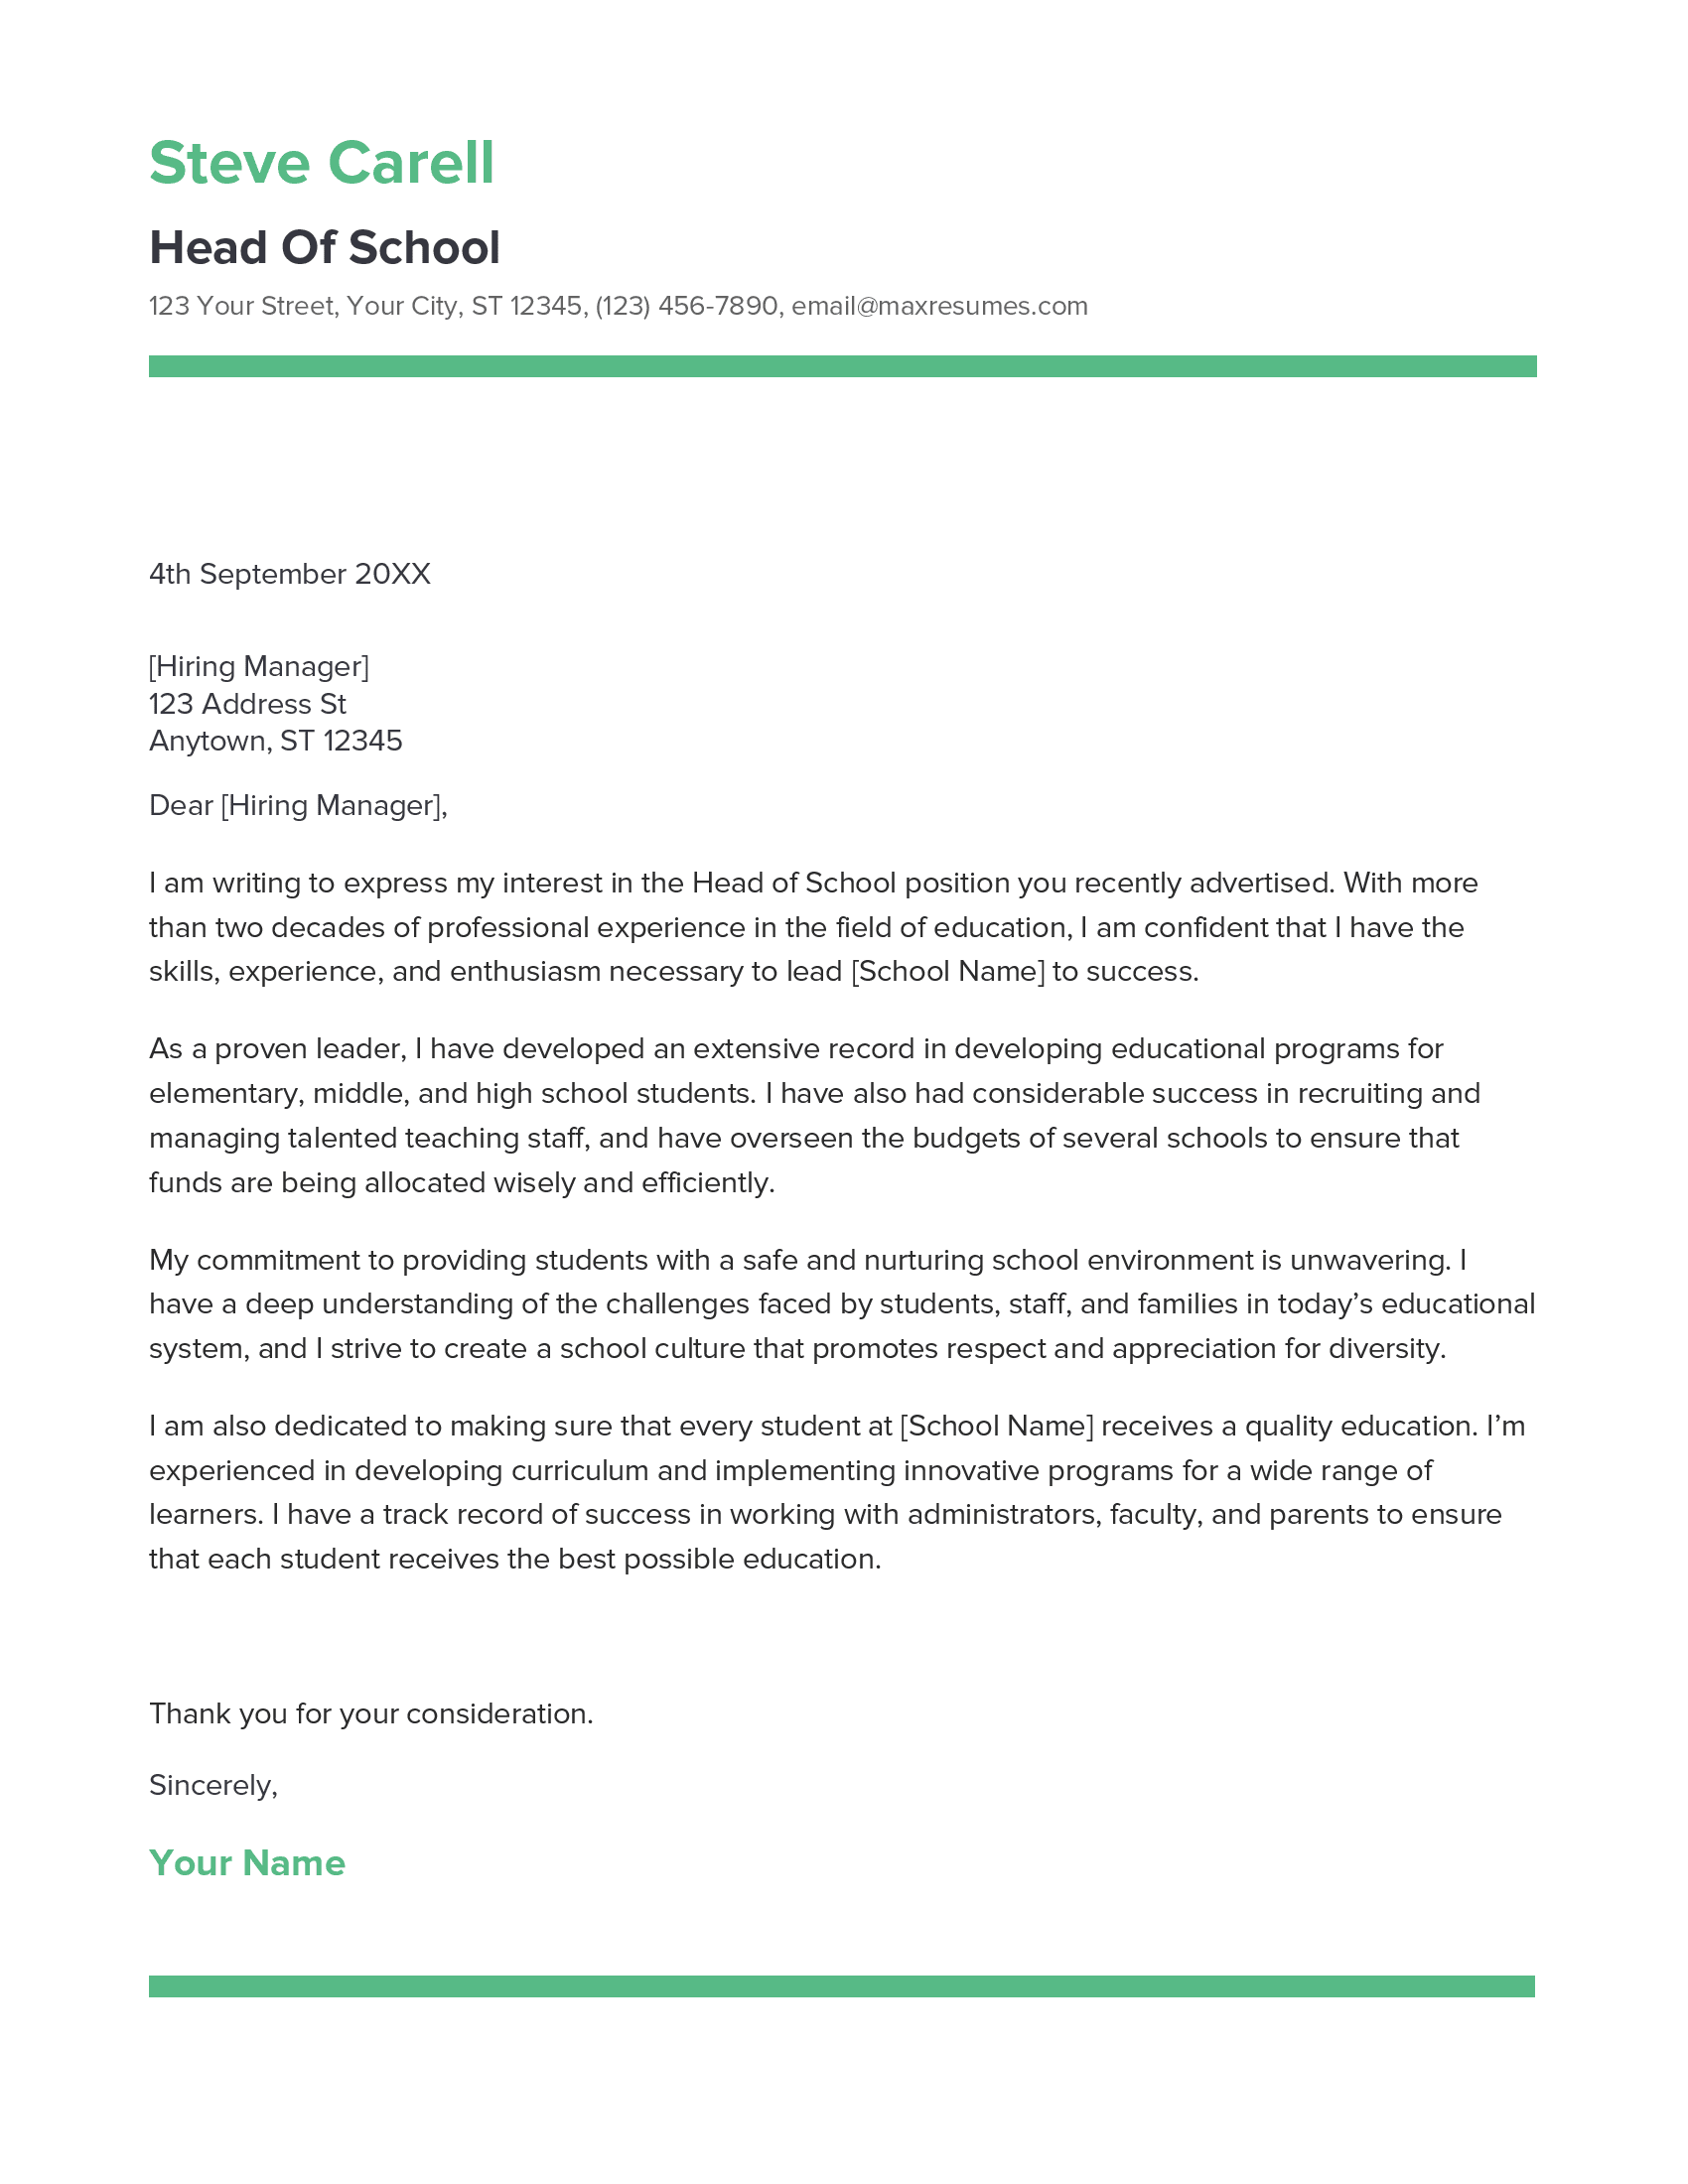 Head Of School Cover Letter Example